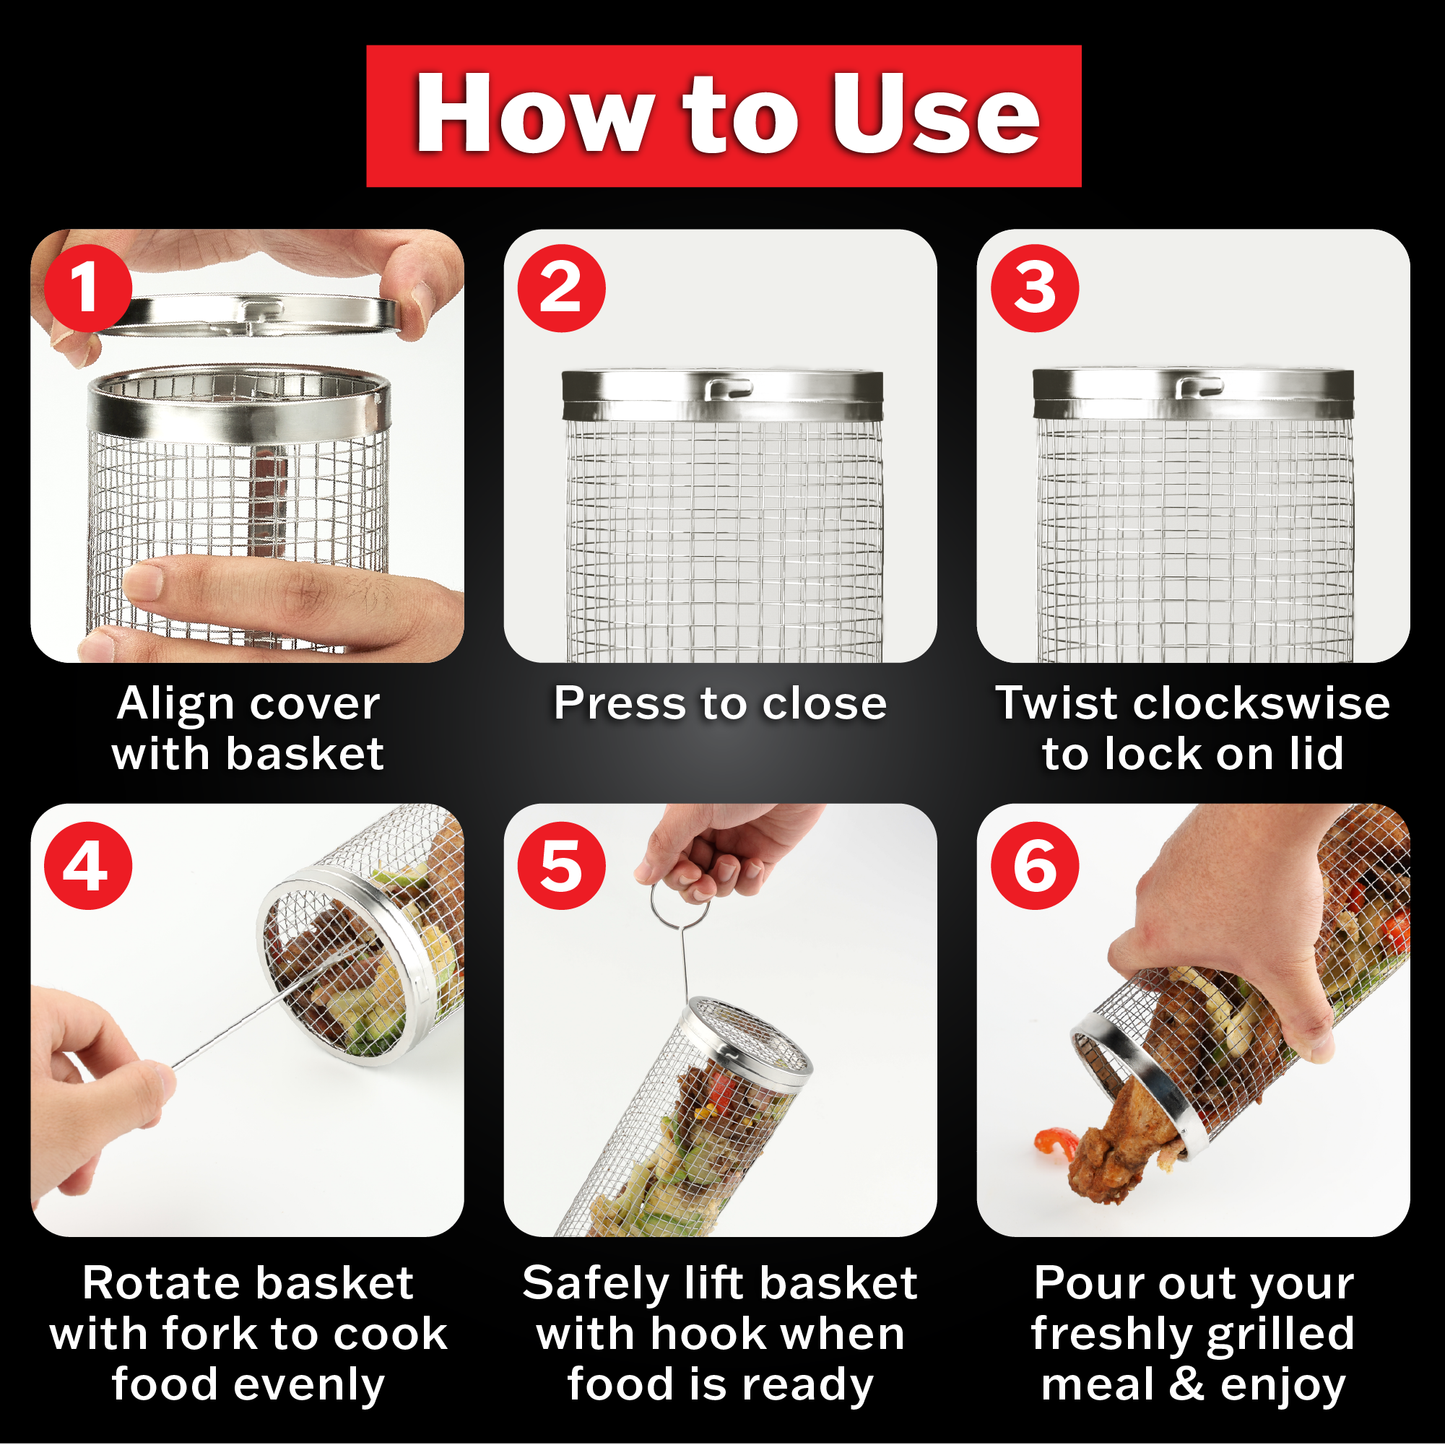 how to use instruction for rolling bbq basket; Steps: 1. align cover with basket, 2. press to close, 3. twist clockwise to lock lid, 4. rotate basket with fork to cook food evenly, 5. safely lift basket with hook when food is ready, 6. pour out your freshly grilled meal and enjoy